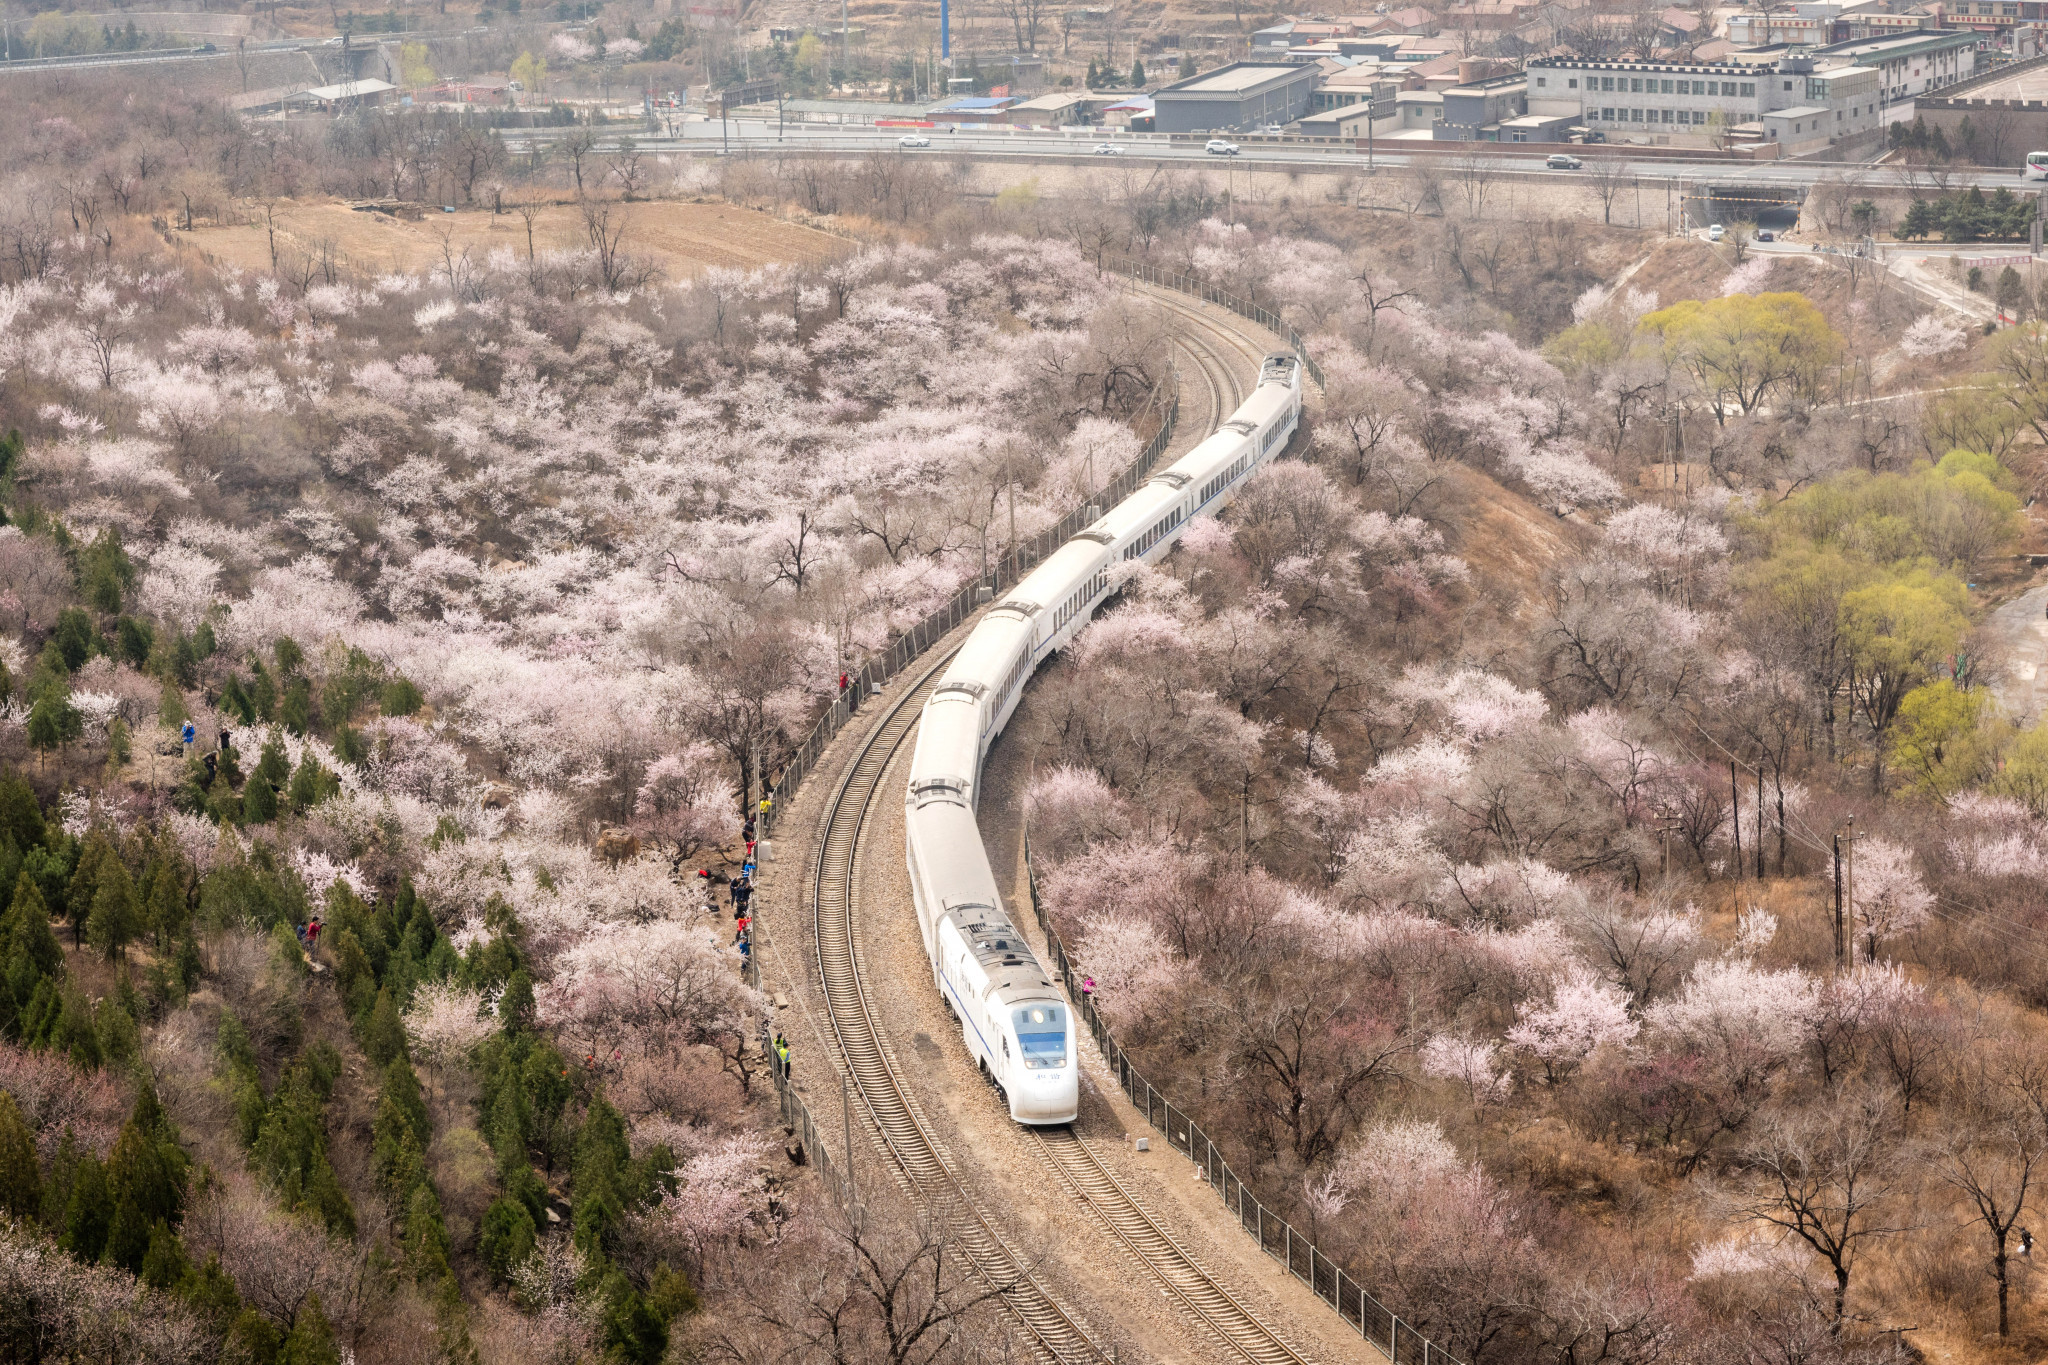 Boost for Beijing 2022 as construction begins on high-speed railway linking host city and Zhangjiakou